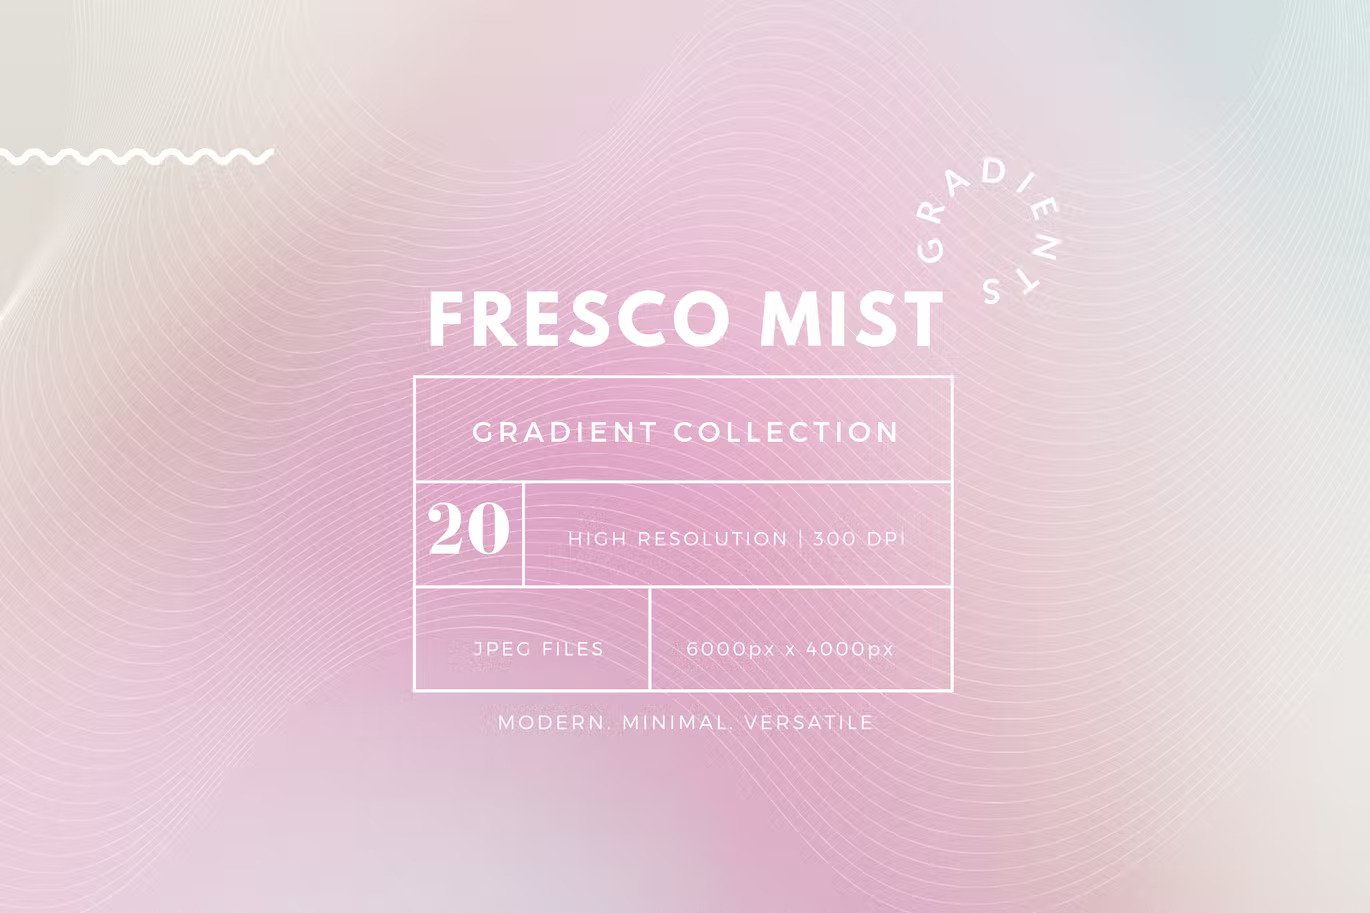 A collection of pastel gradients